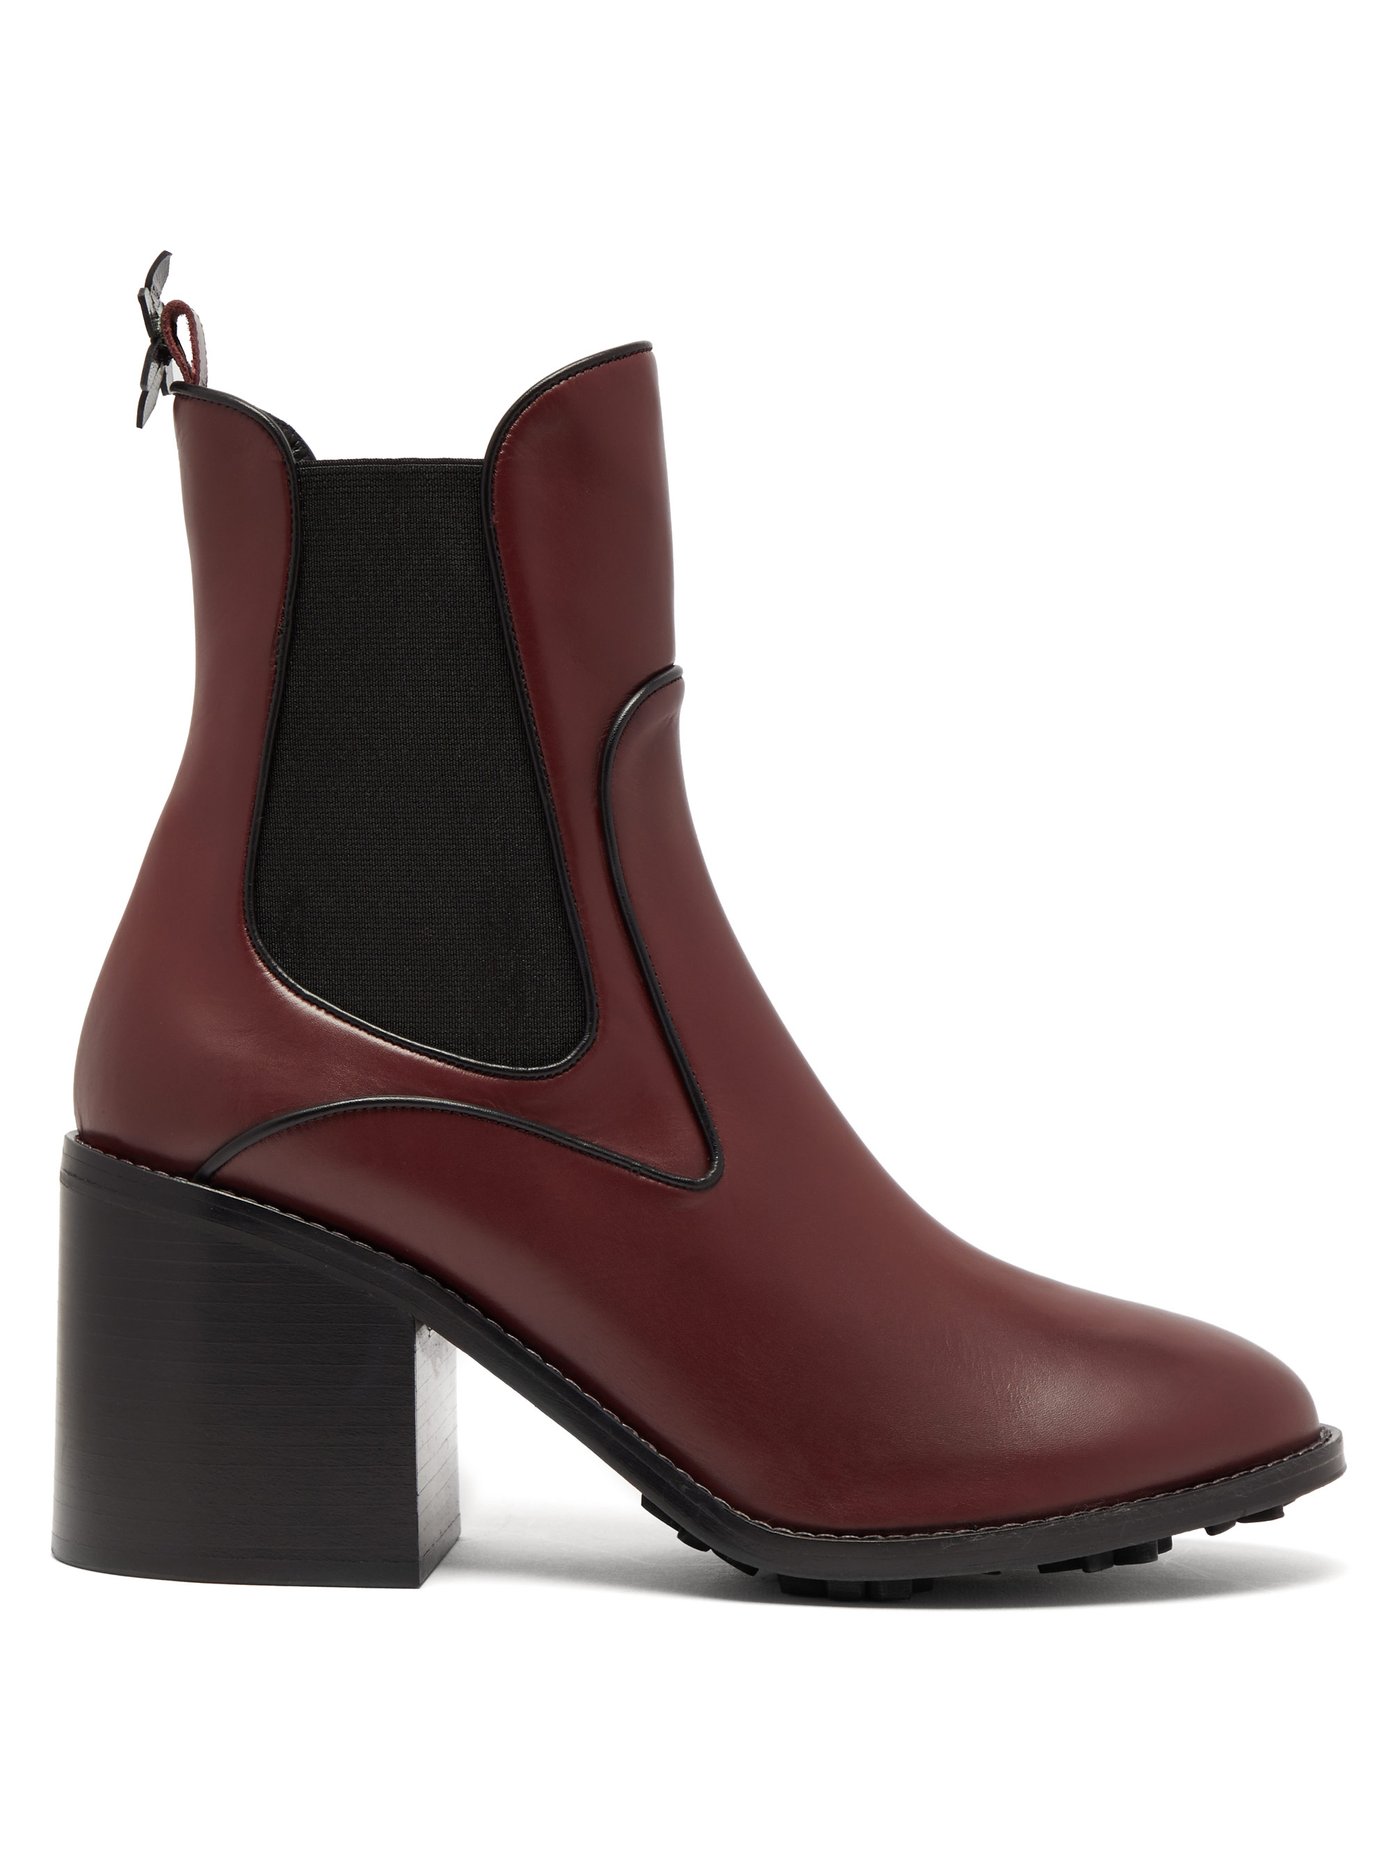 next leather ankle boots